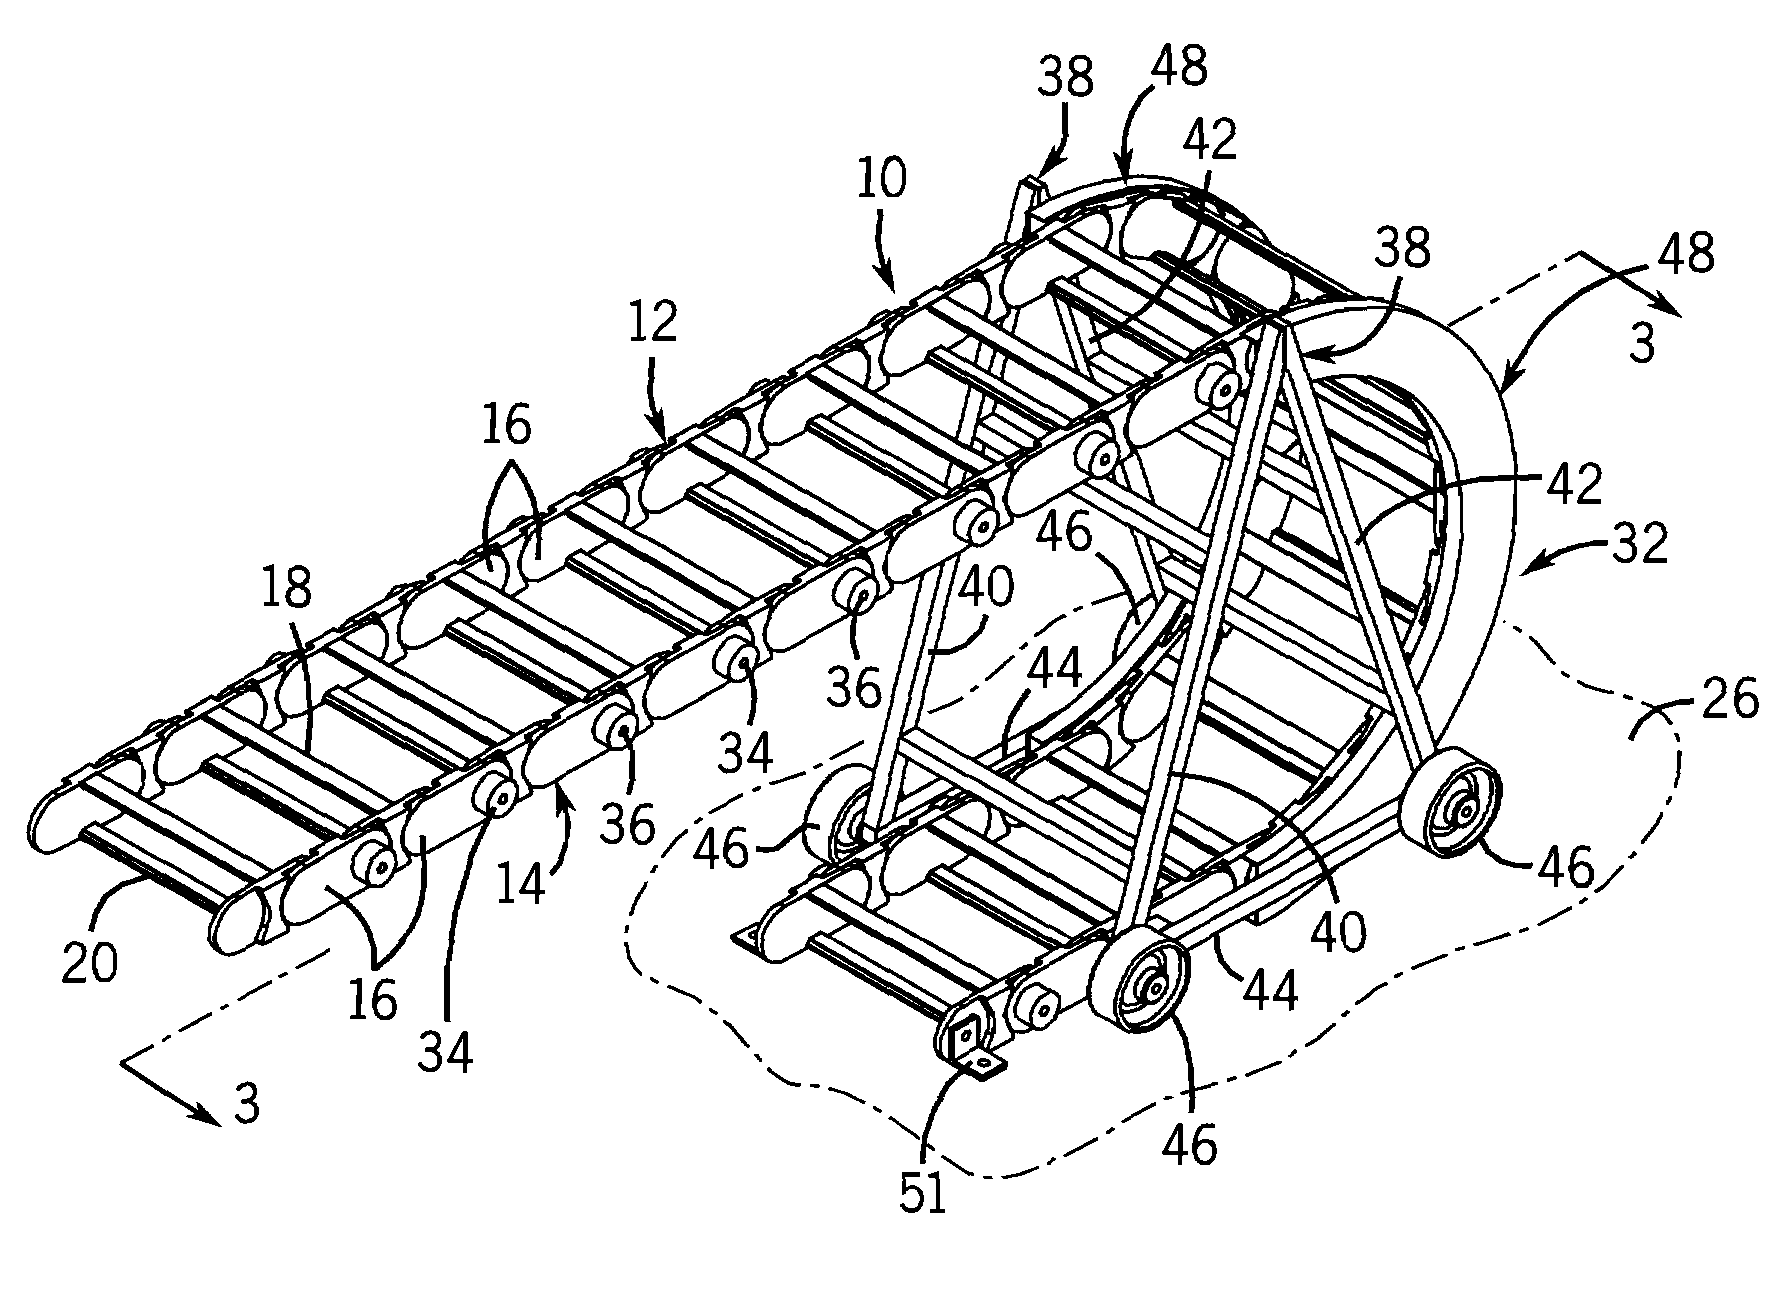 Cable and hose carrier support system